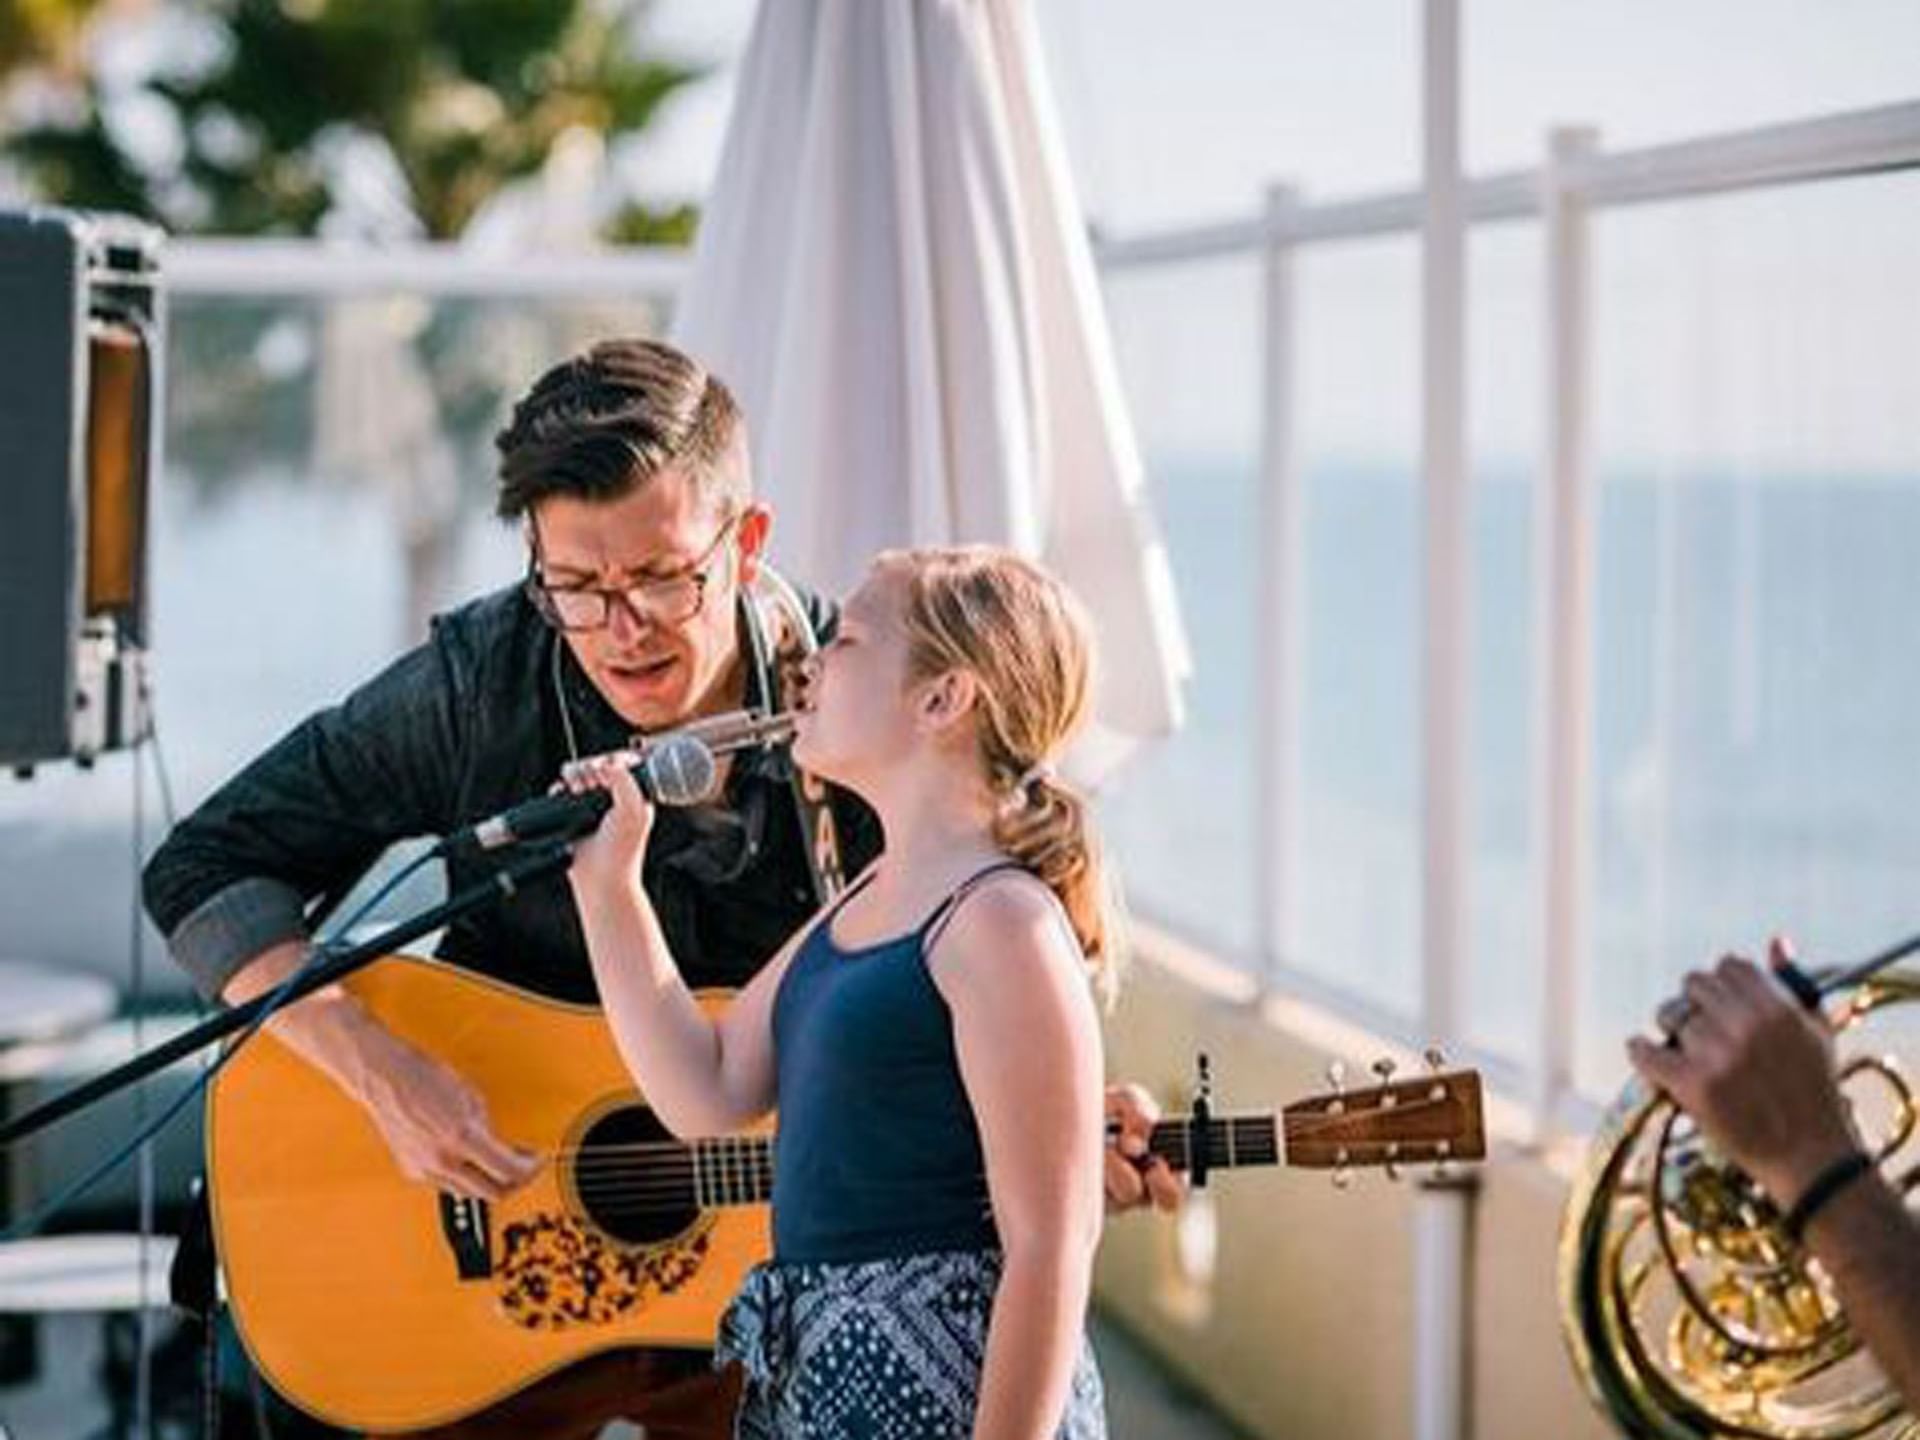 Guitarist playing guitar & singing next to a young girl on stage at SeaCrest Oceanfront Hotel Pismo Beach